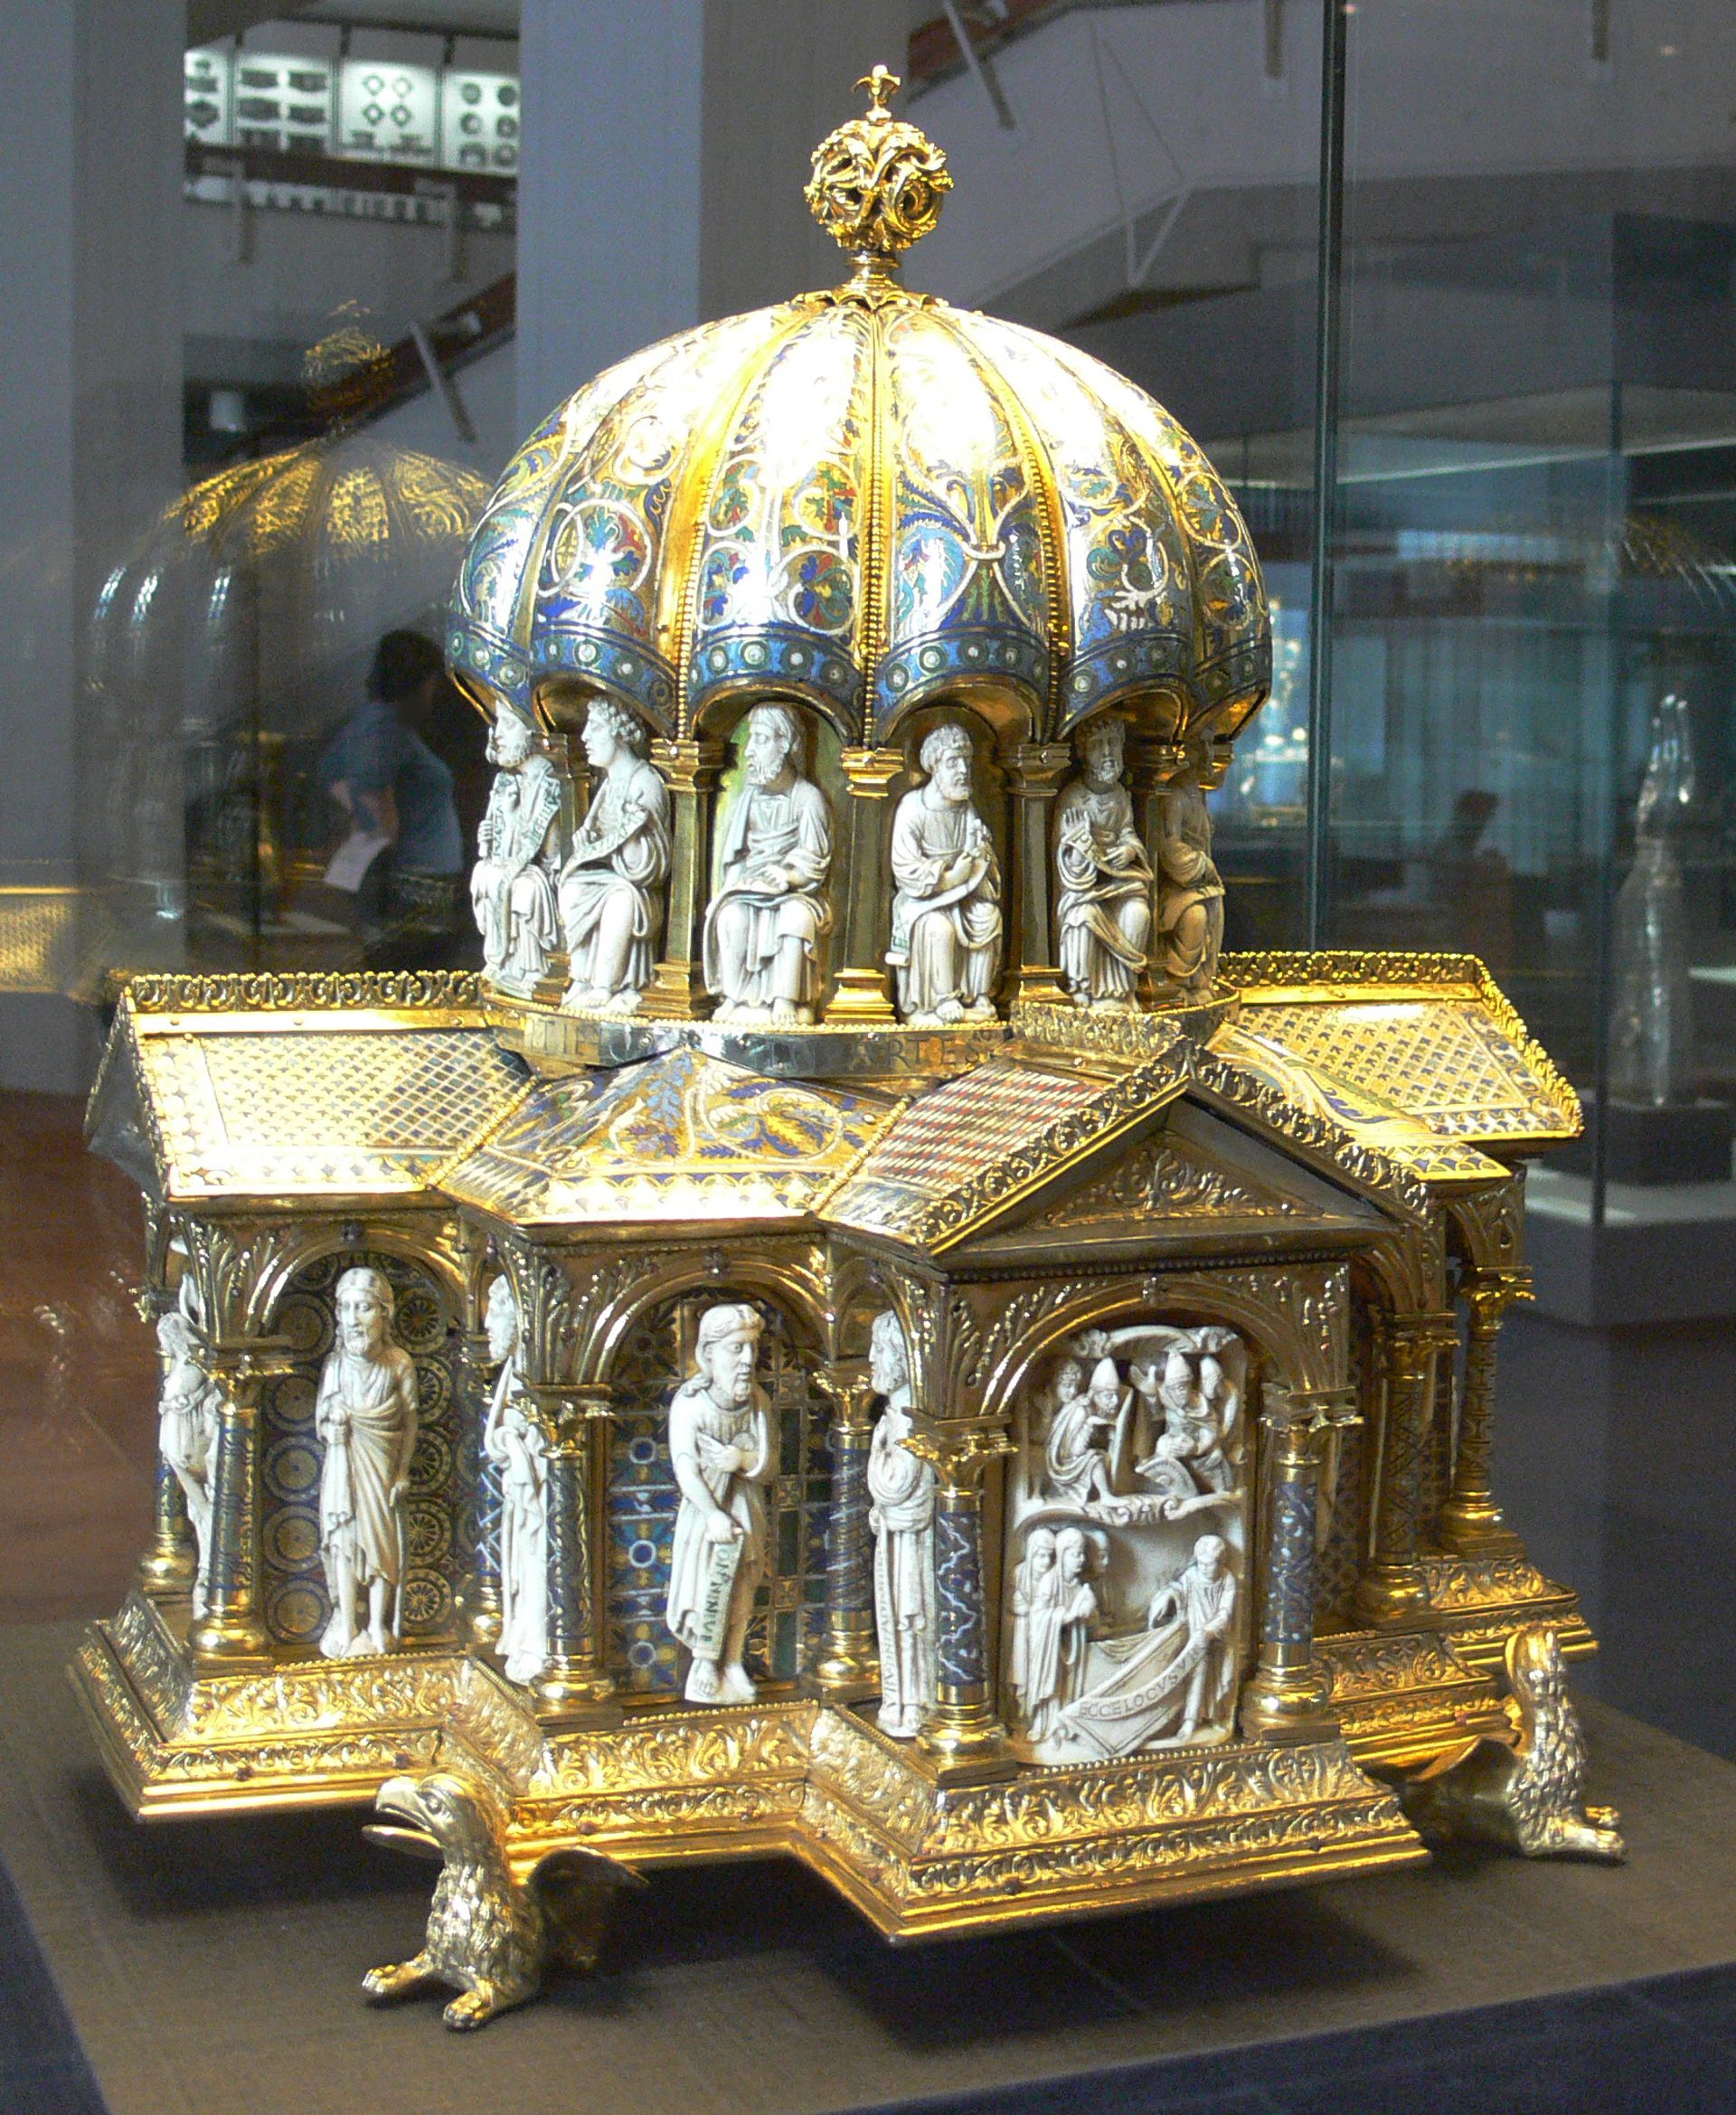 This cupola reliquary is part of the Guelph Treasure, displayed at the Kunstgewerbemuseum (Museum of Applied Arts) in Berlin Photo via Wikimedia Commons